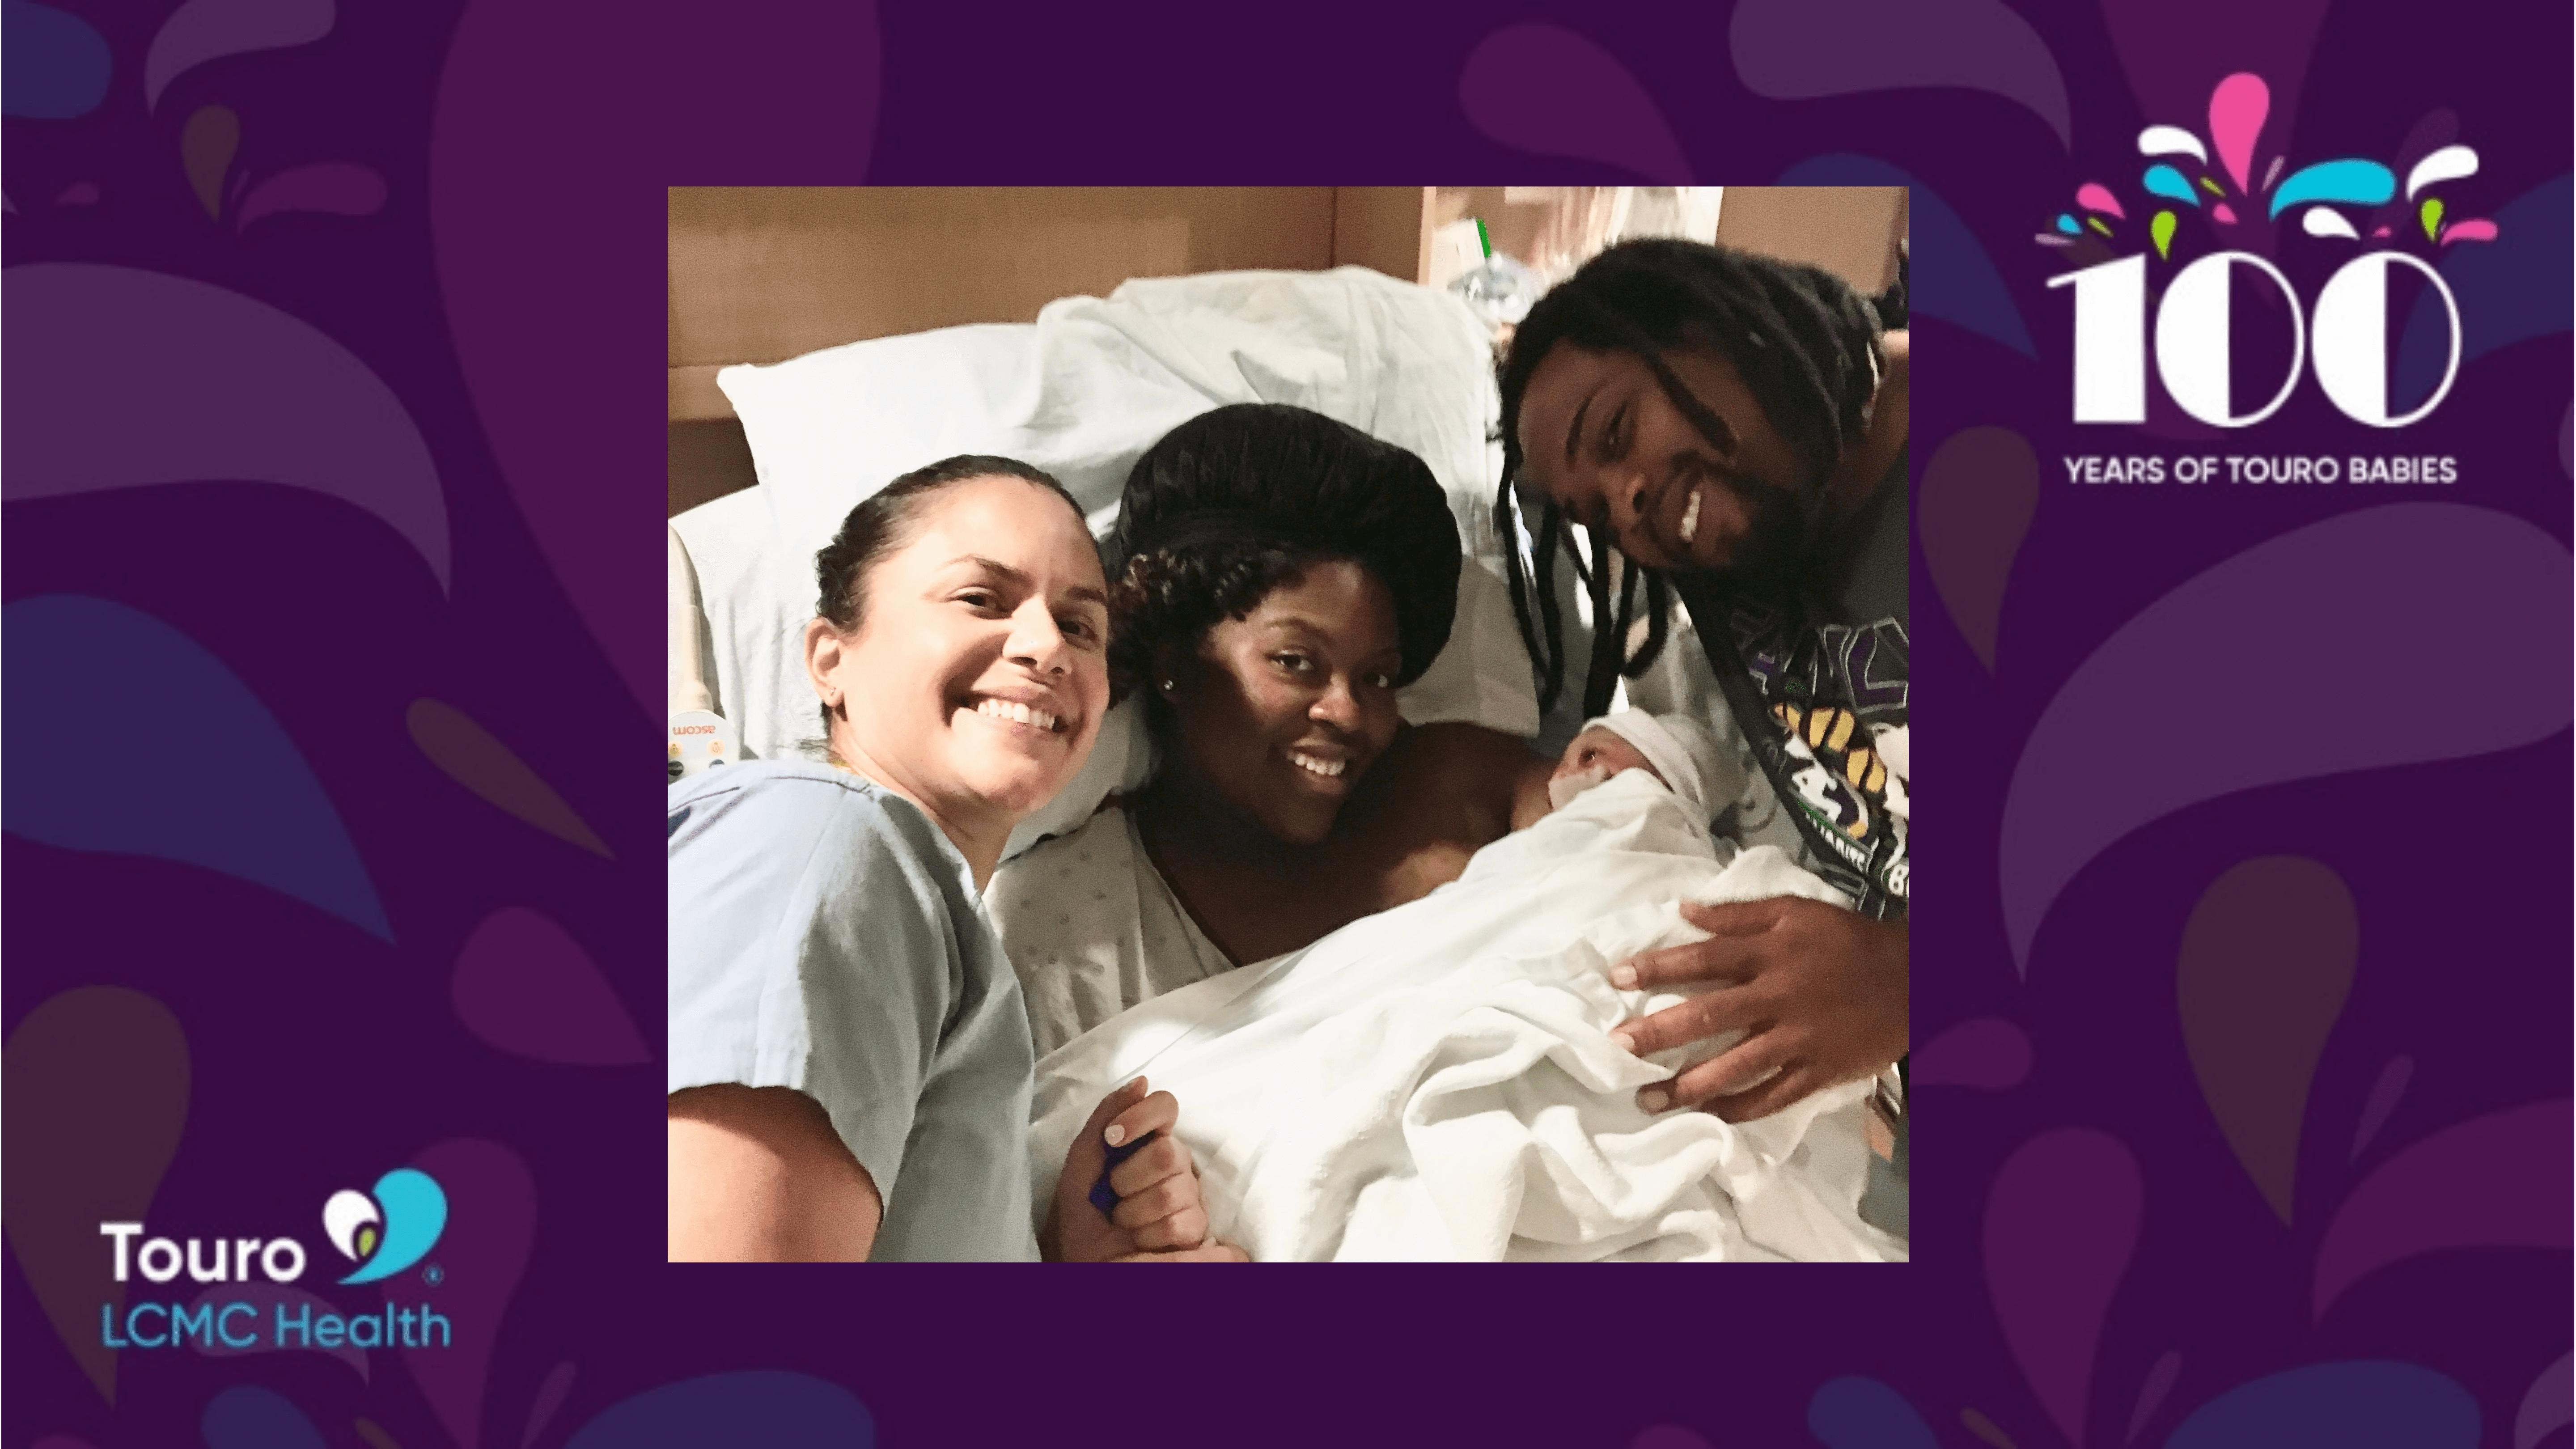 A Touro New Orleans Birth Story 